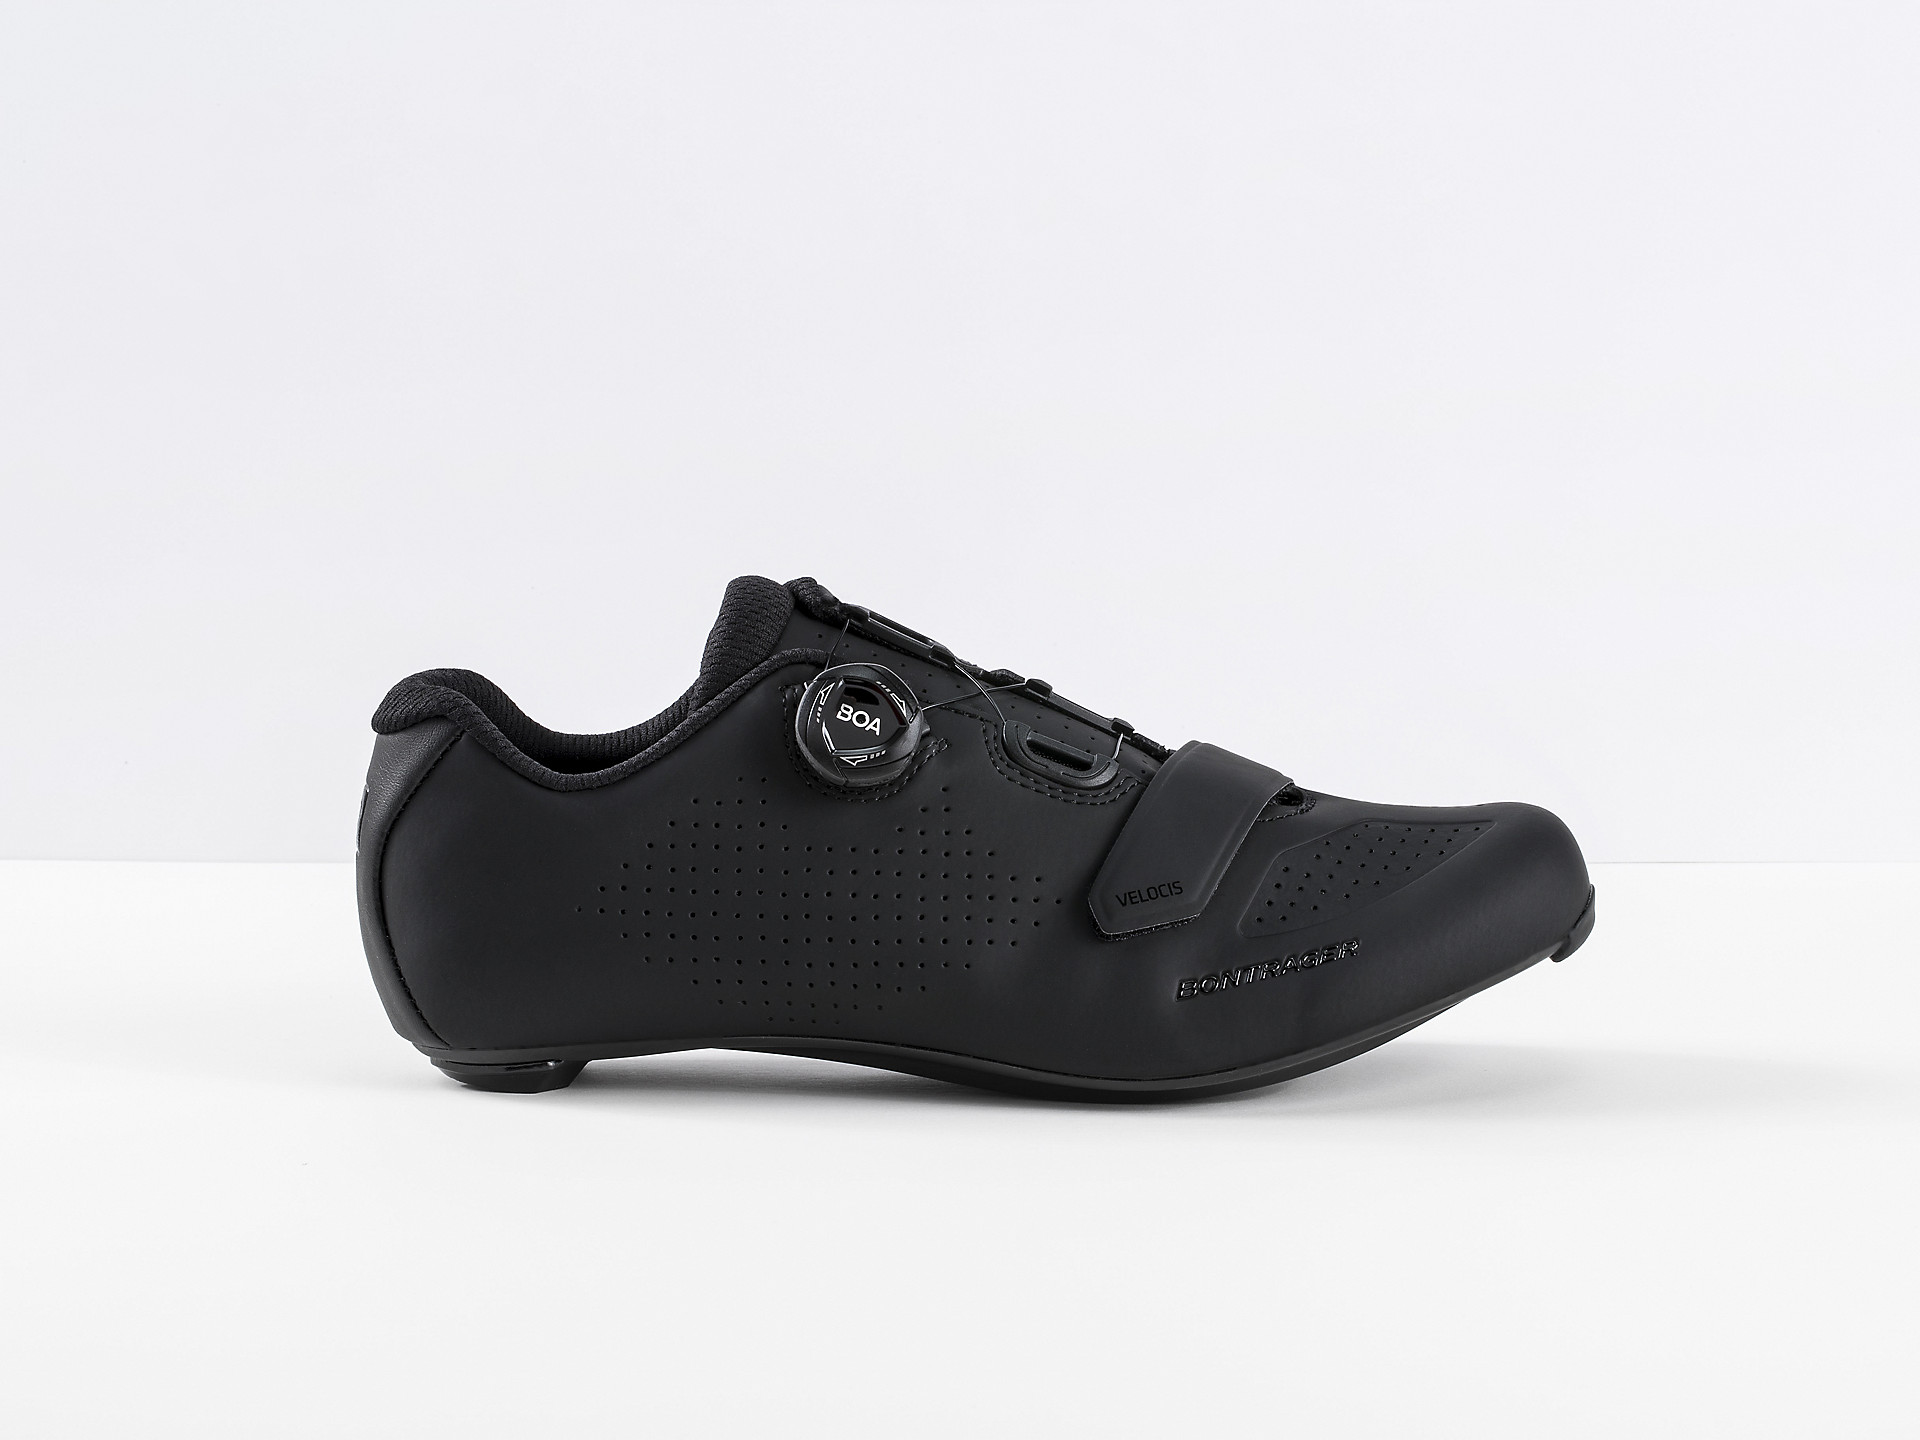 <a href="https://cycles-clement.be/product/bont-chaussures-velocis-45-black/">BONT CHAUSSURES VELOCIS  45 BLACK</a>